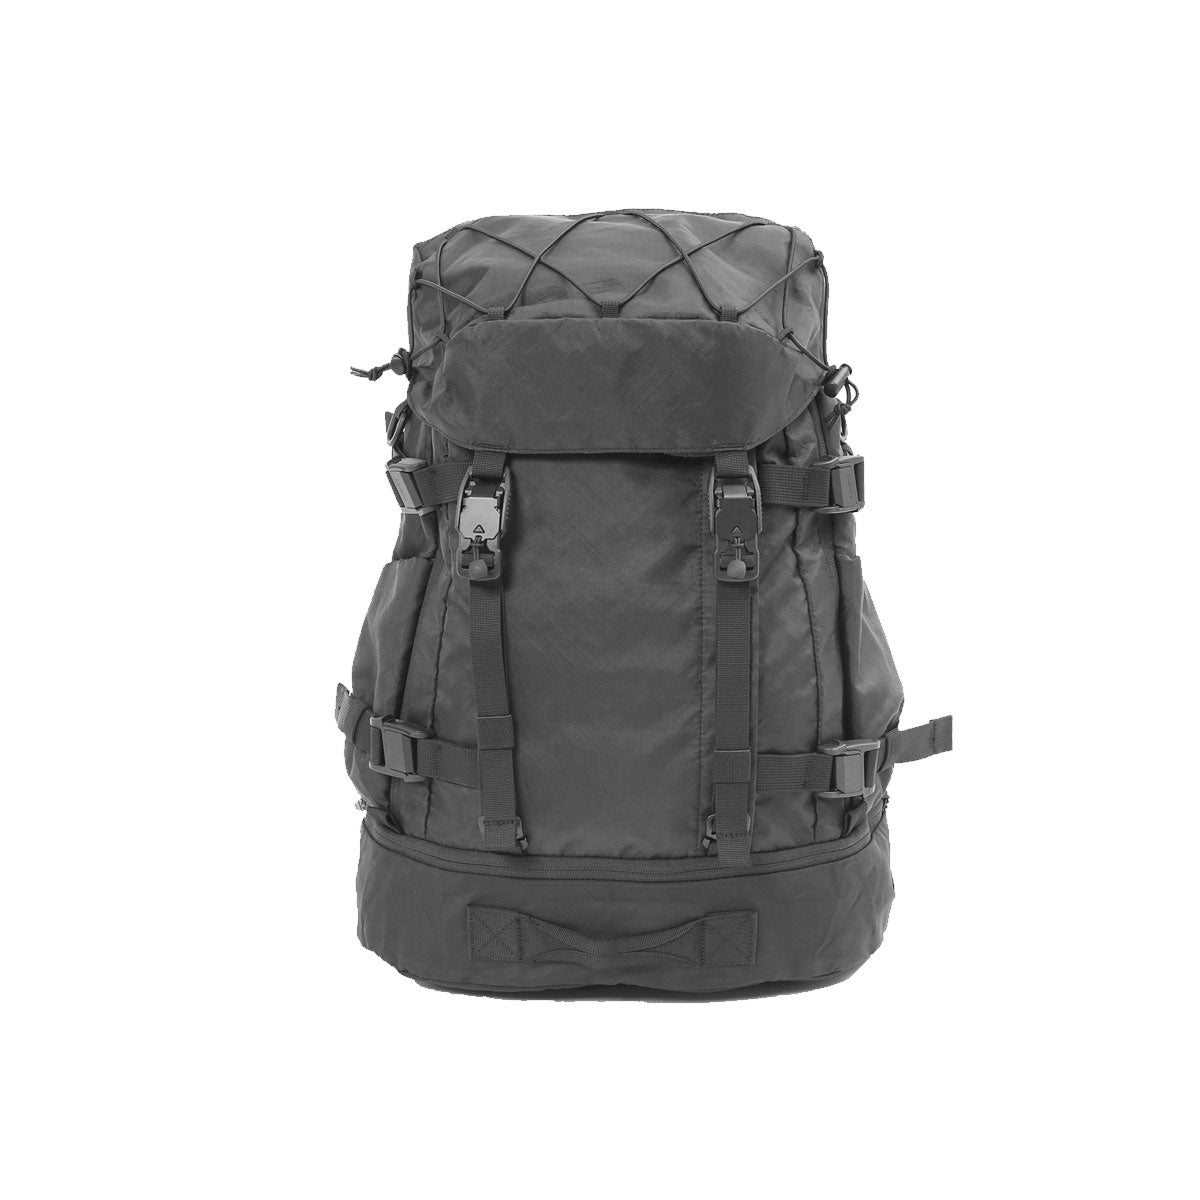 [PO] Code of Bell : Double Name Project II - 4020X Backpack